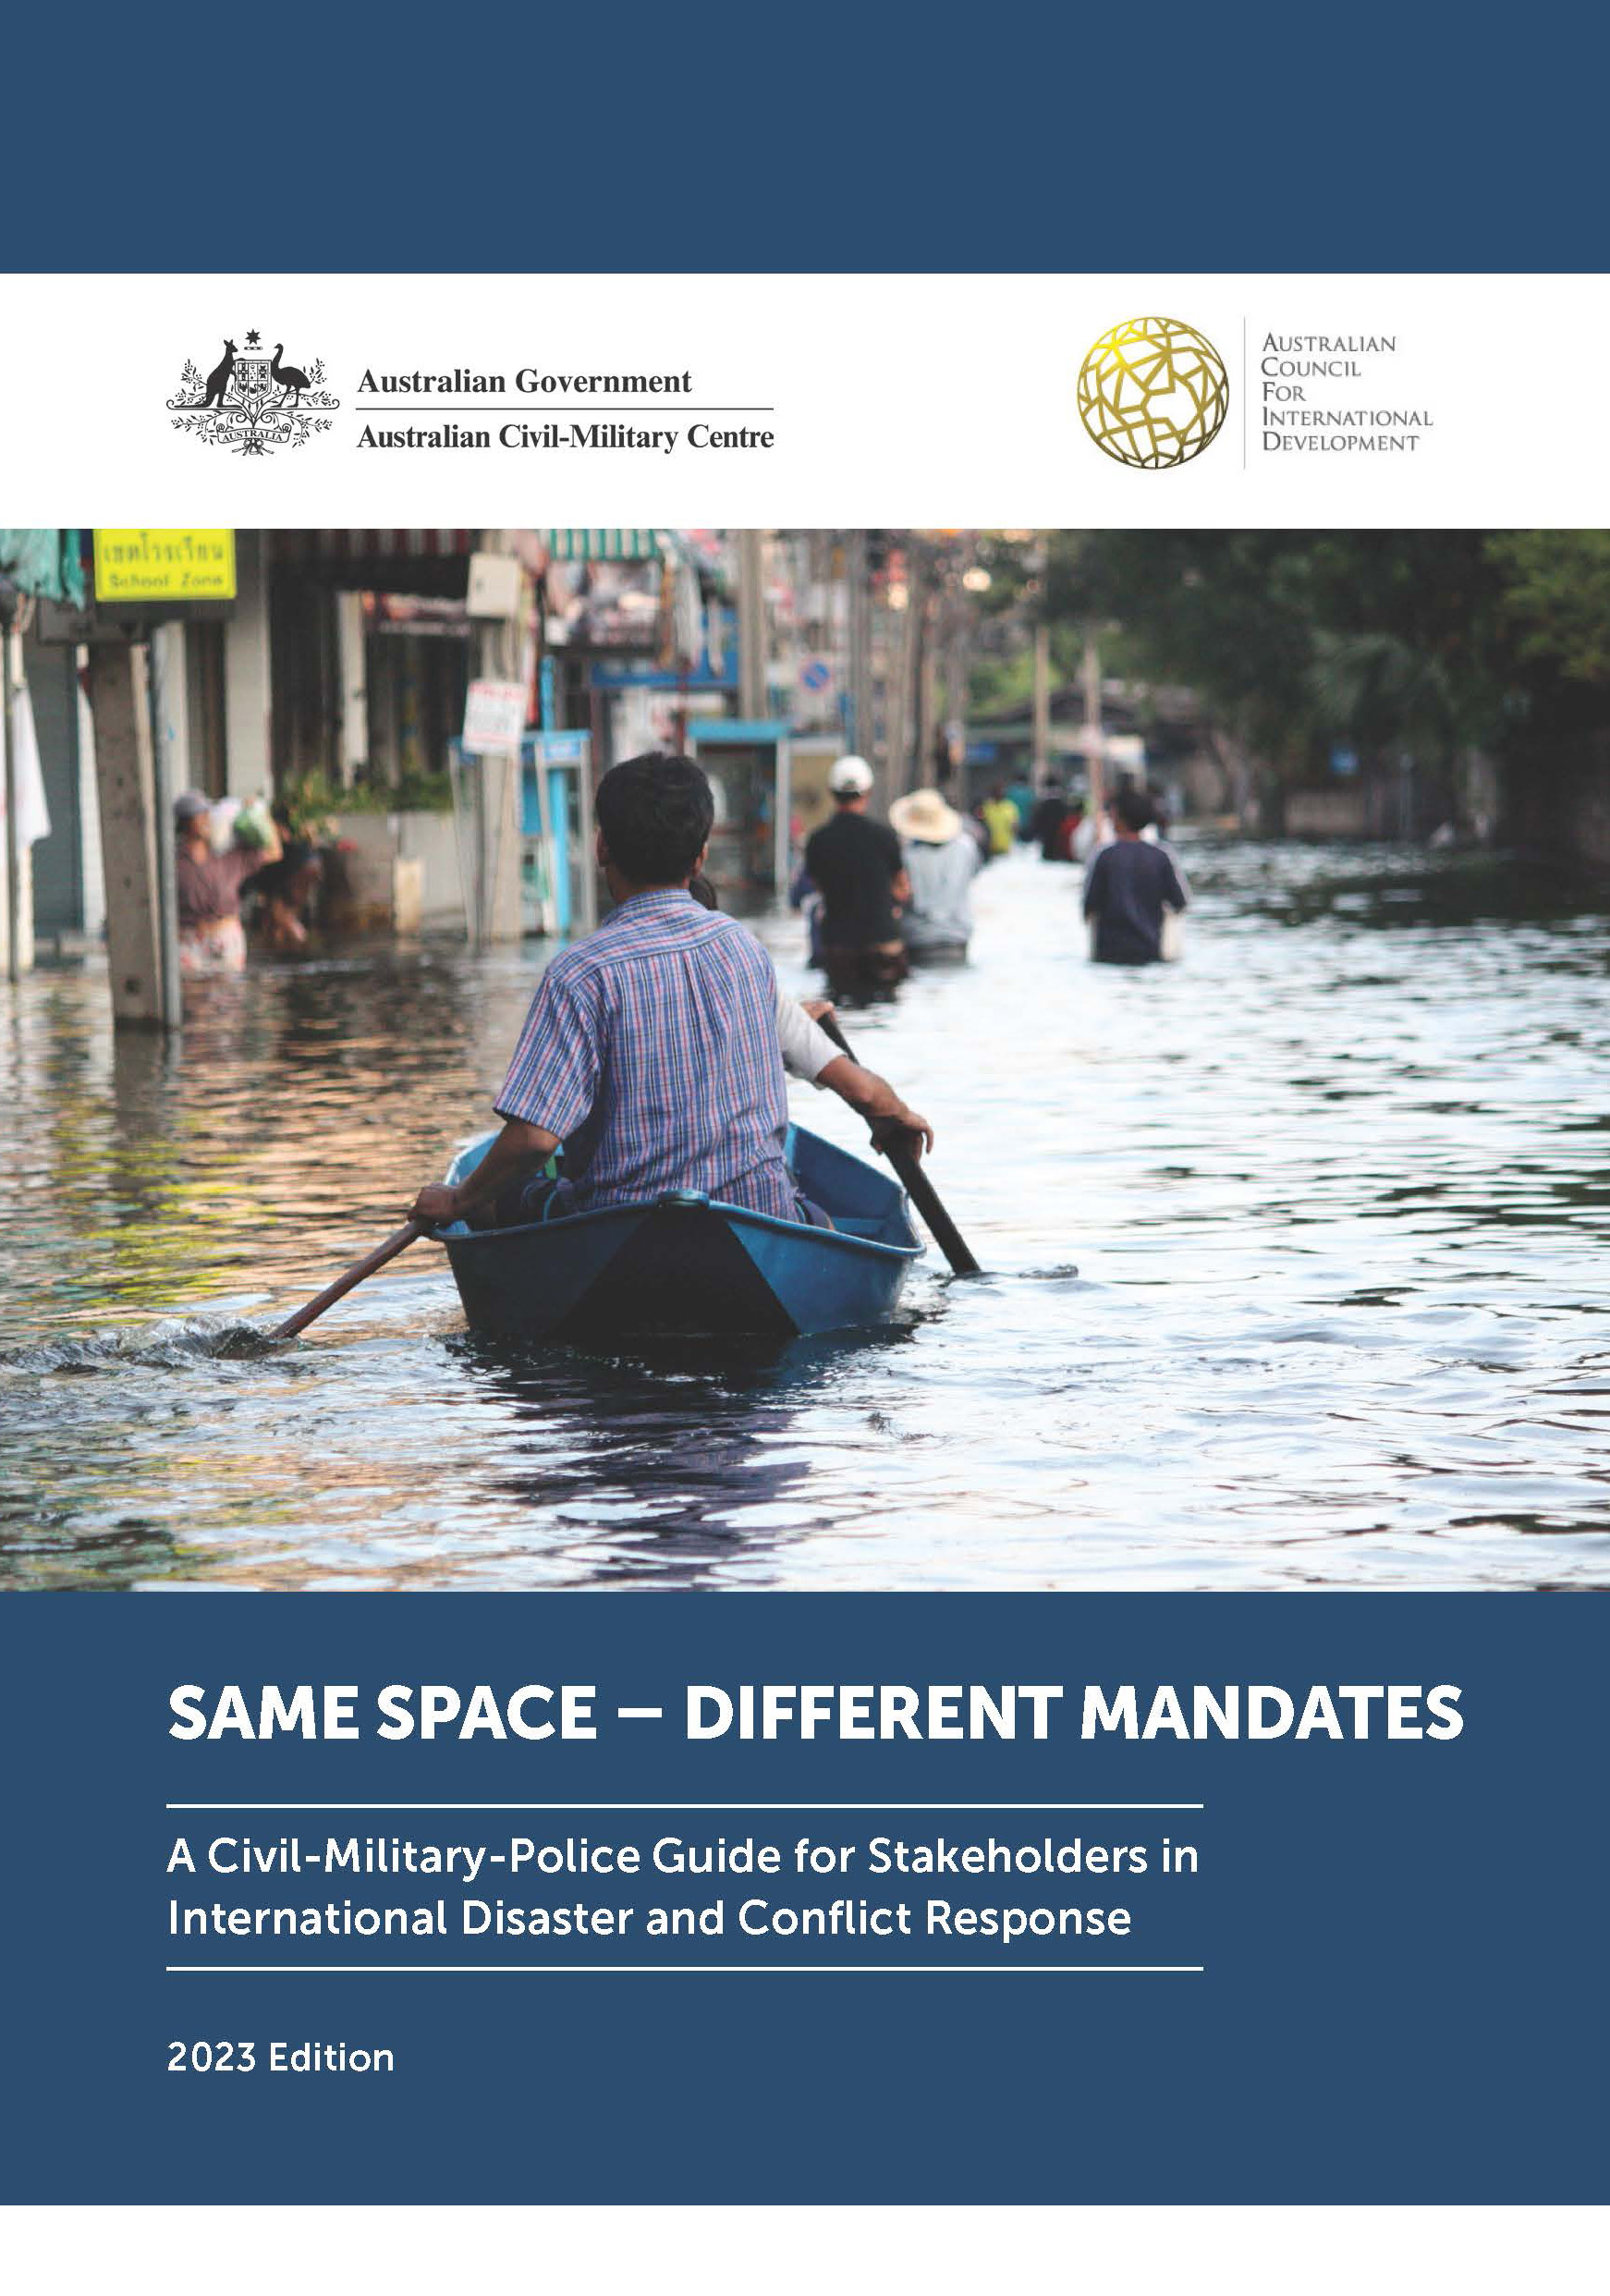 Cover of Same Space Different Mandates Book. Features a picture of a man kayaking down a flooded street.